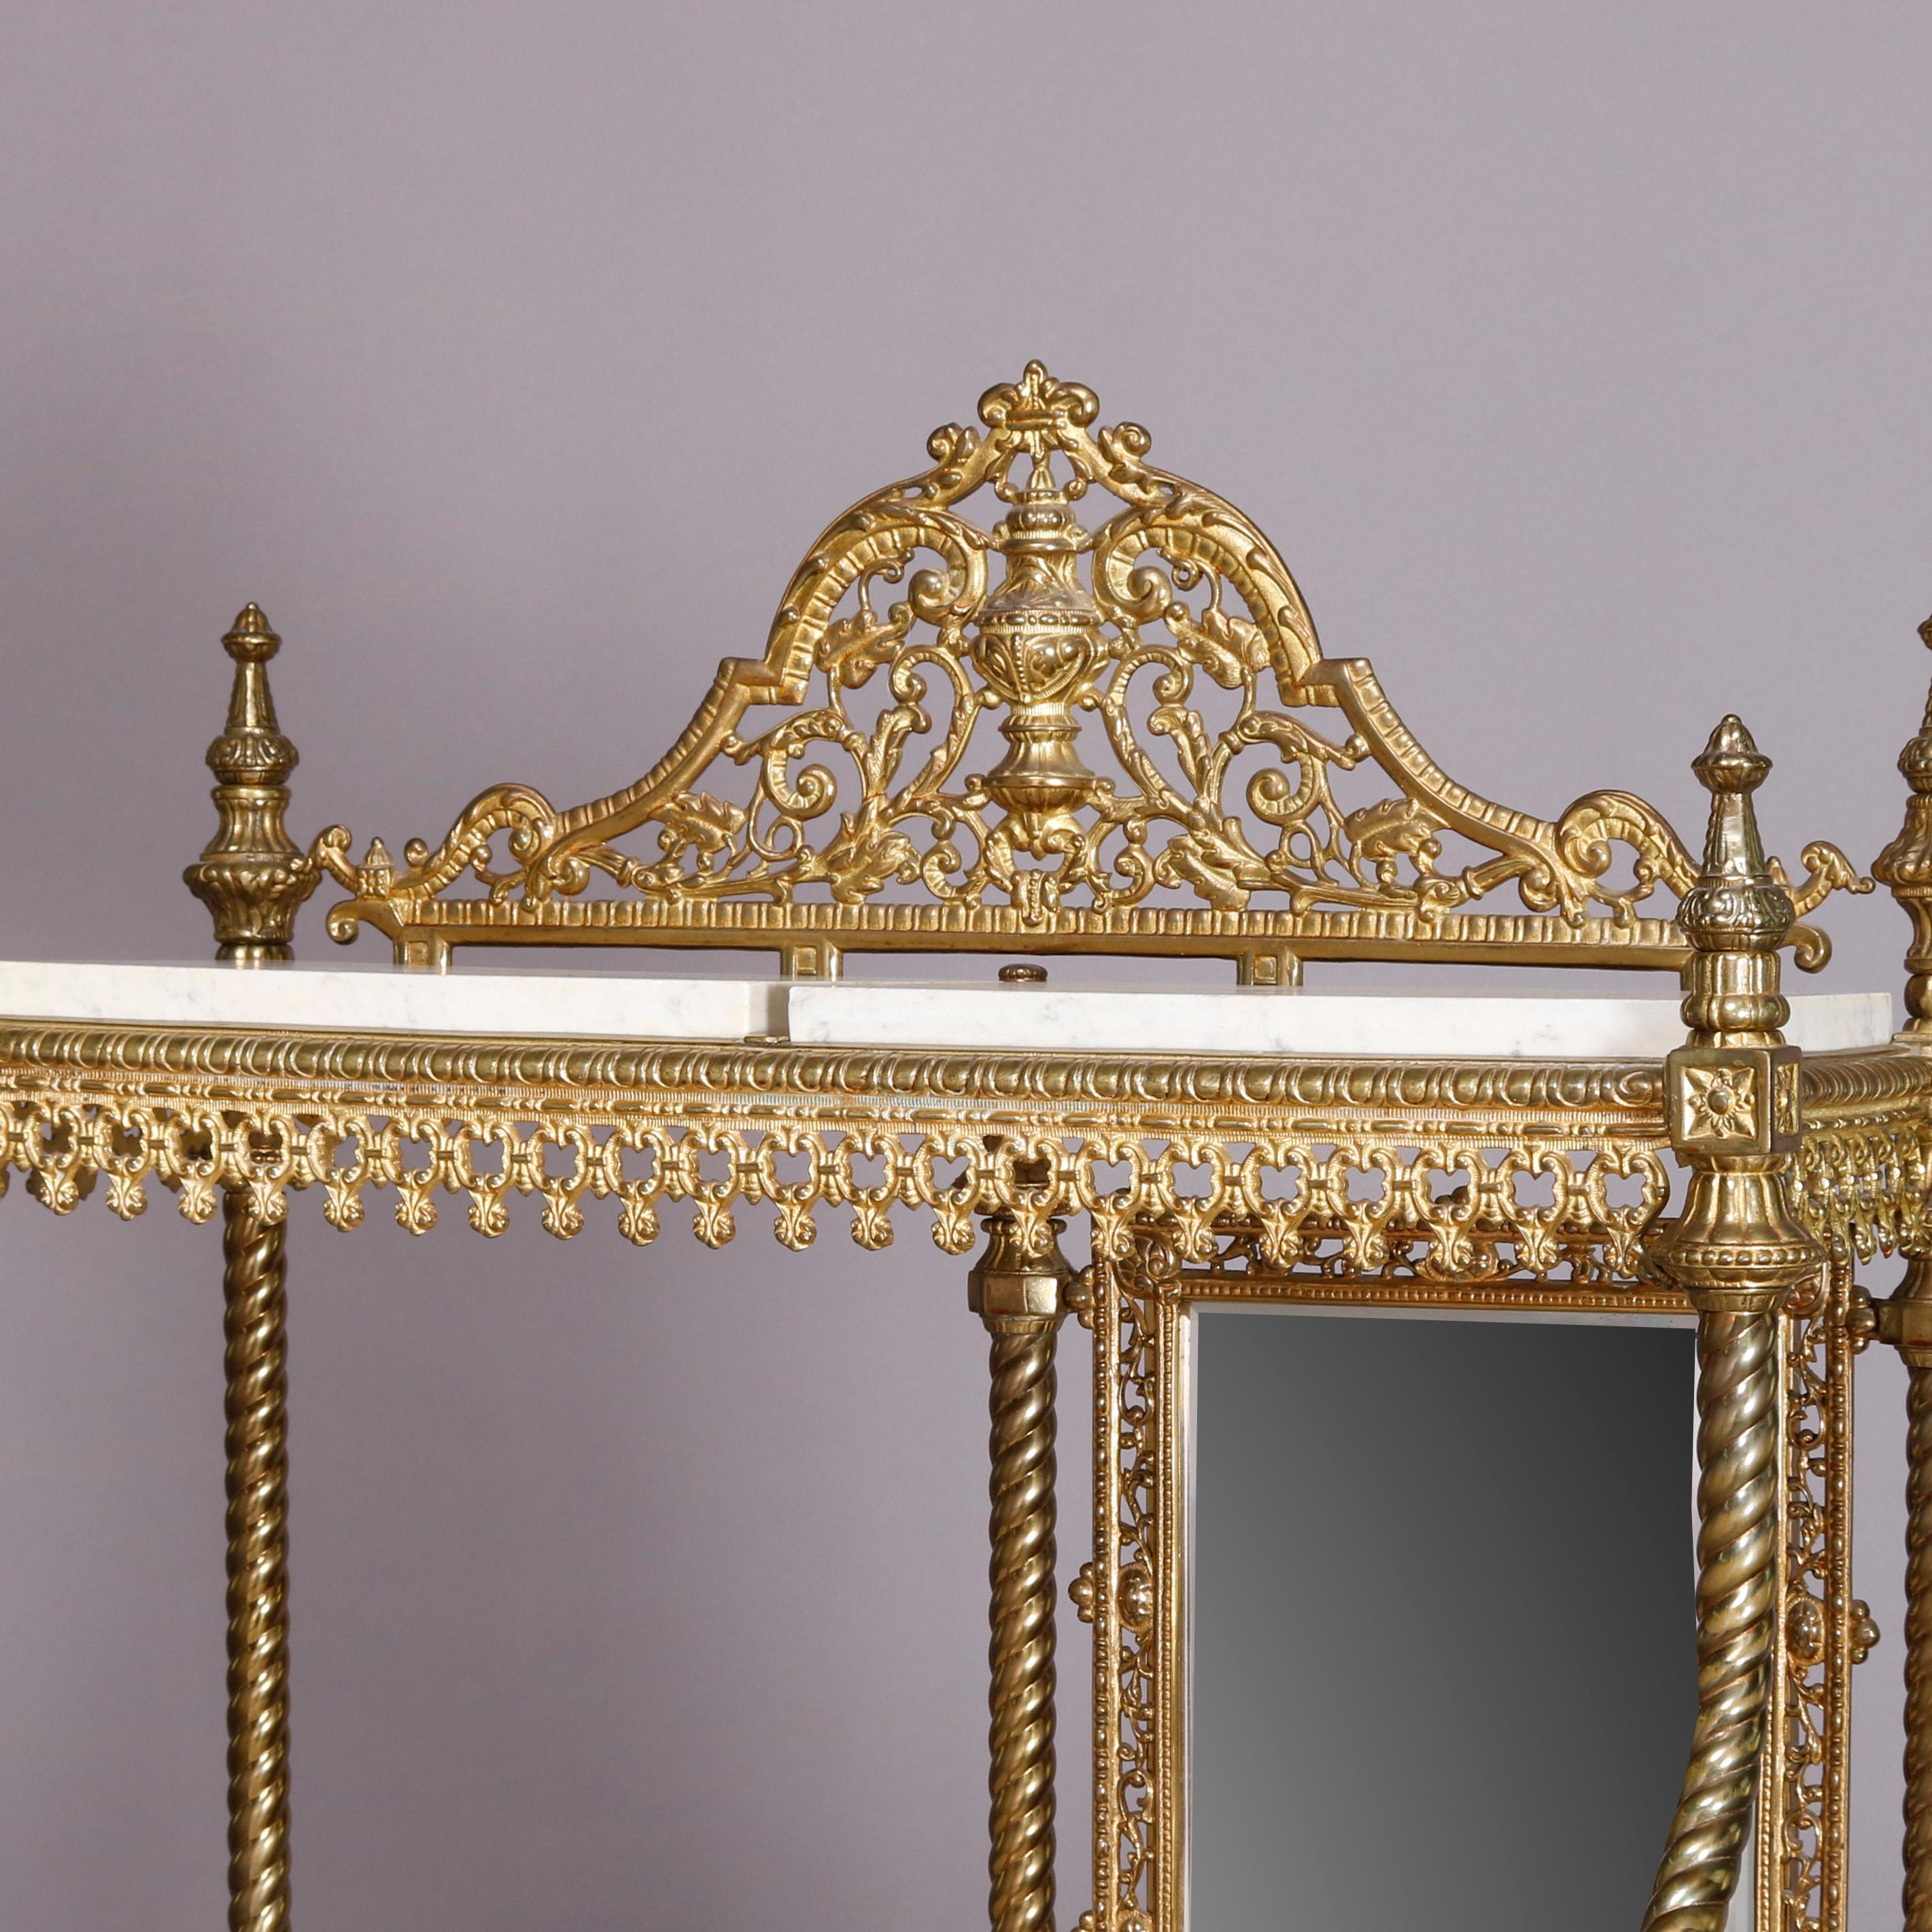 An antique French Louis XVI style étagère offers gilt bronze pierced foliate and floral frame with shaped crest having central urn surmounting staggered marble top shelves, central offset mirror and twisted posts terminating in paw feet, circa